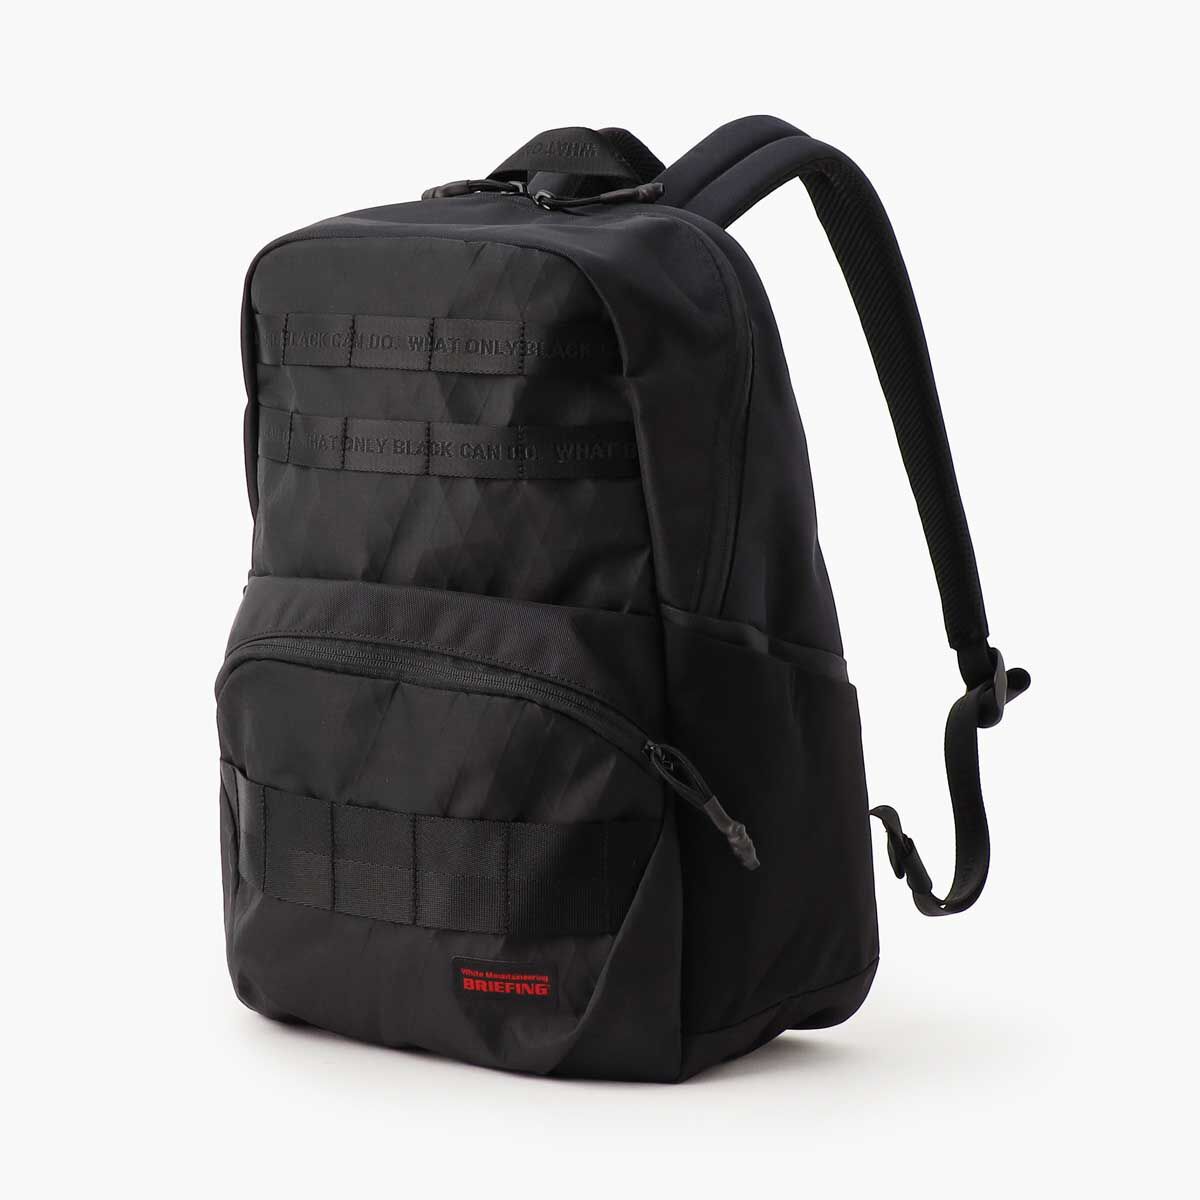 White Mountaineering | BRIEFING | Premium Bags and Luggage